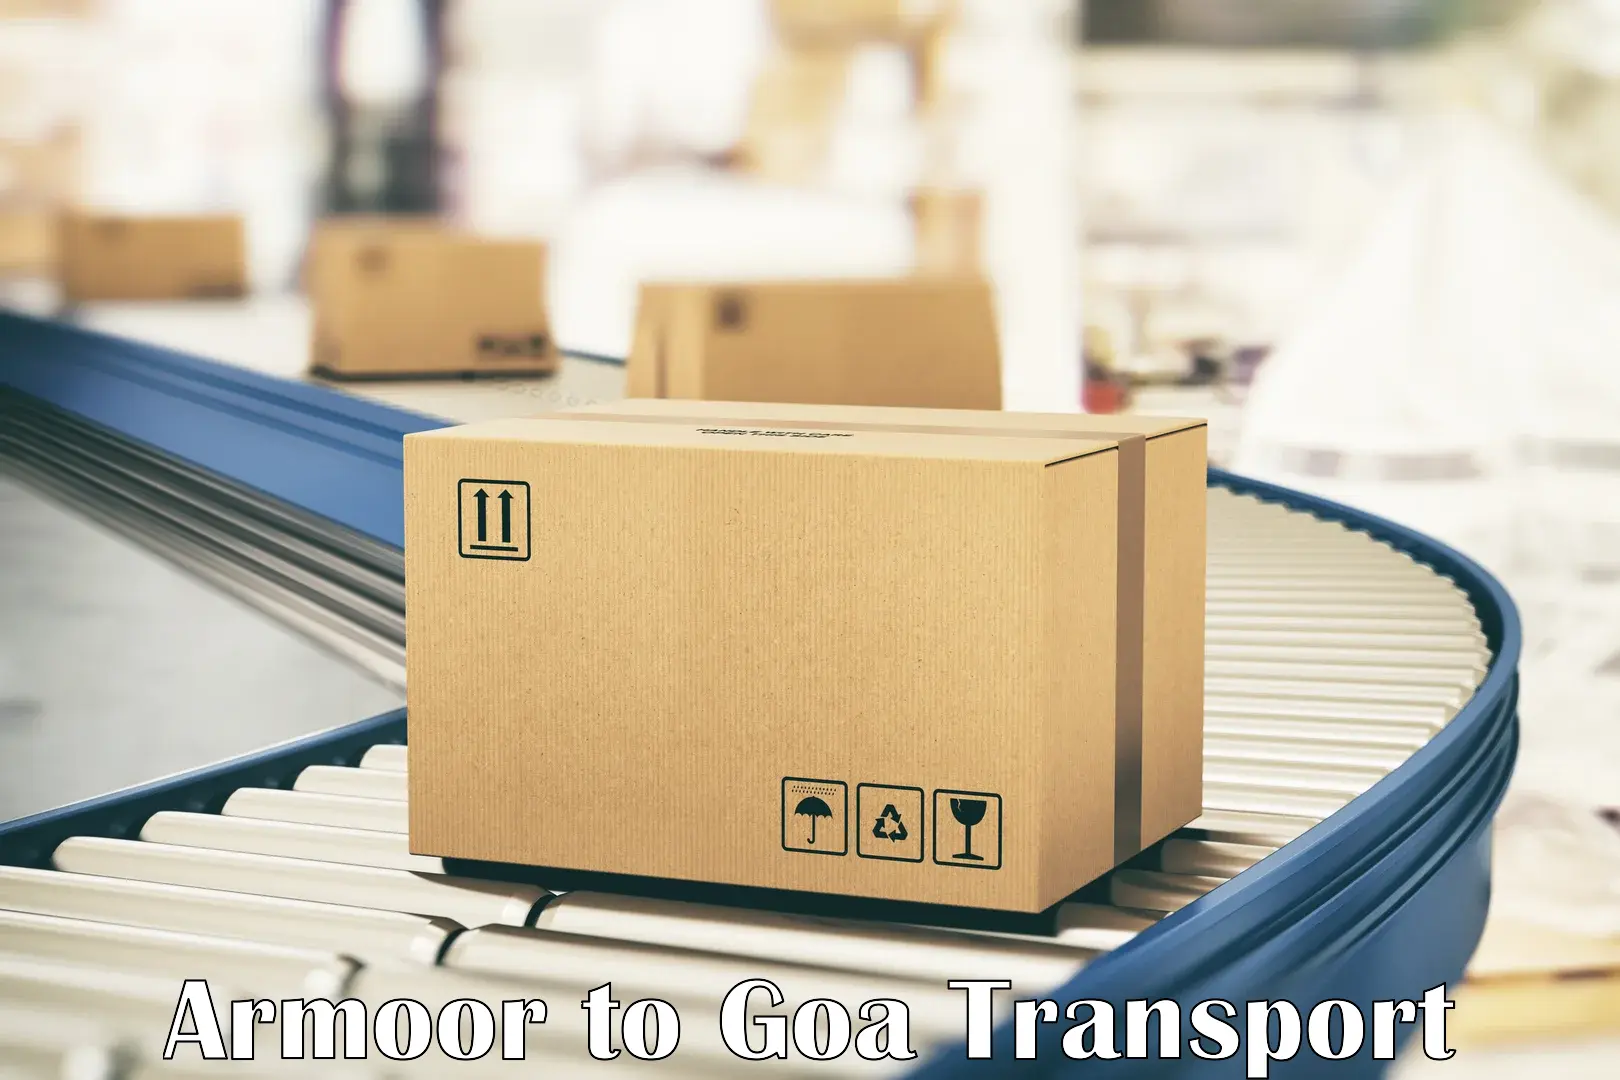 Online transport booking Armoor to South Goa